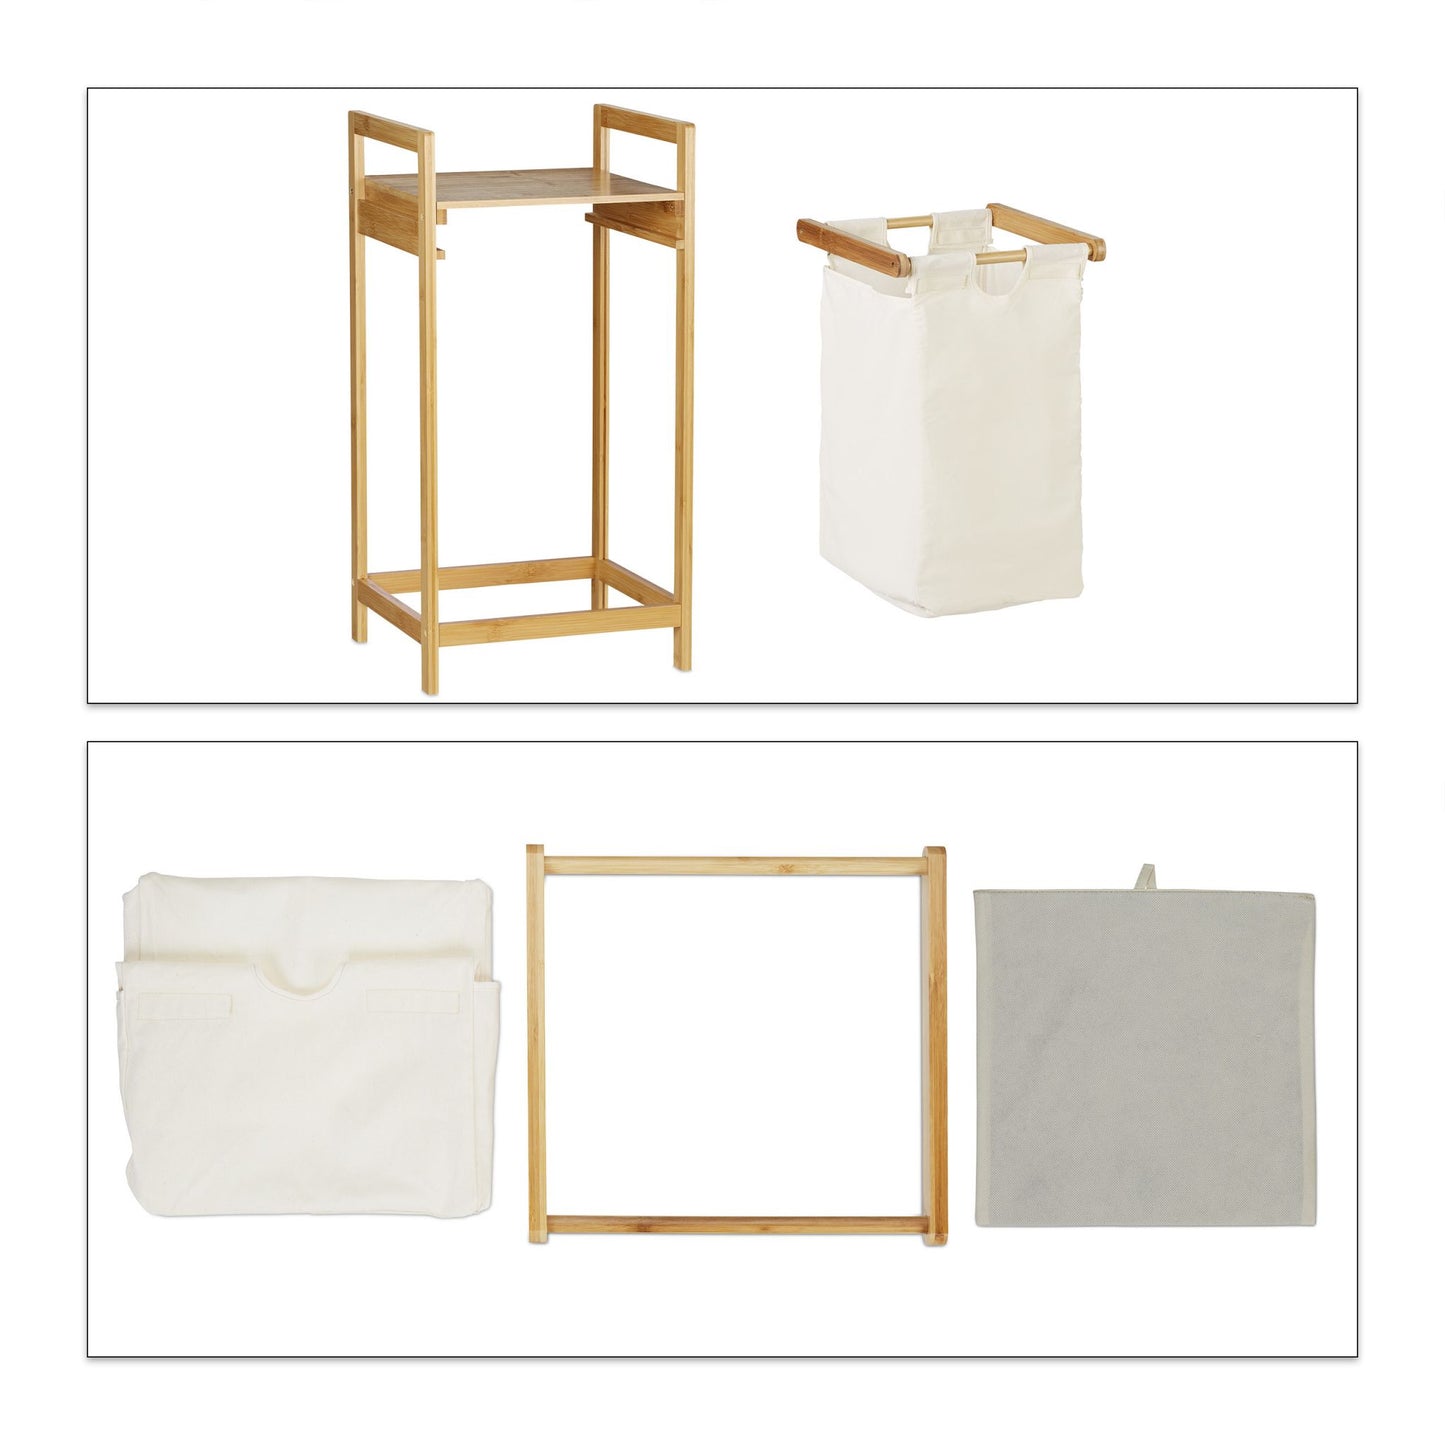 RelaxDays  Pull-Out Bamboo Laundry Basket Bamboo Bathrooms